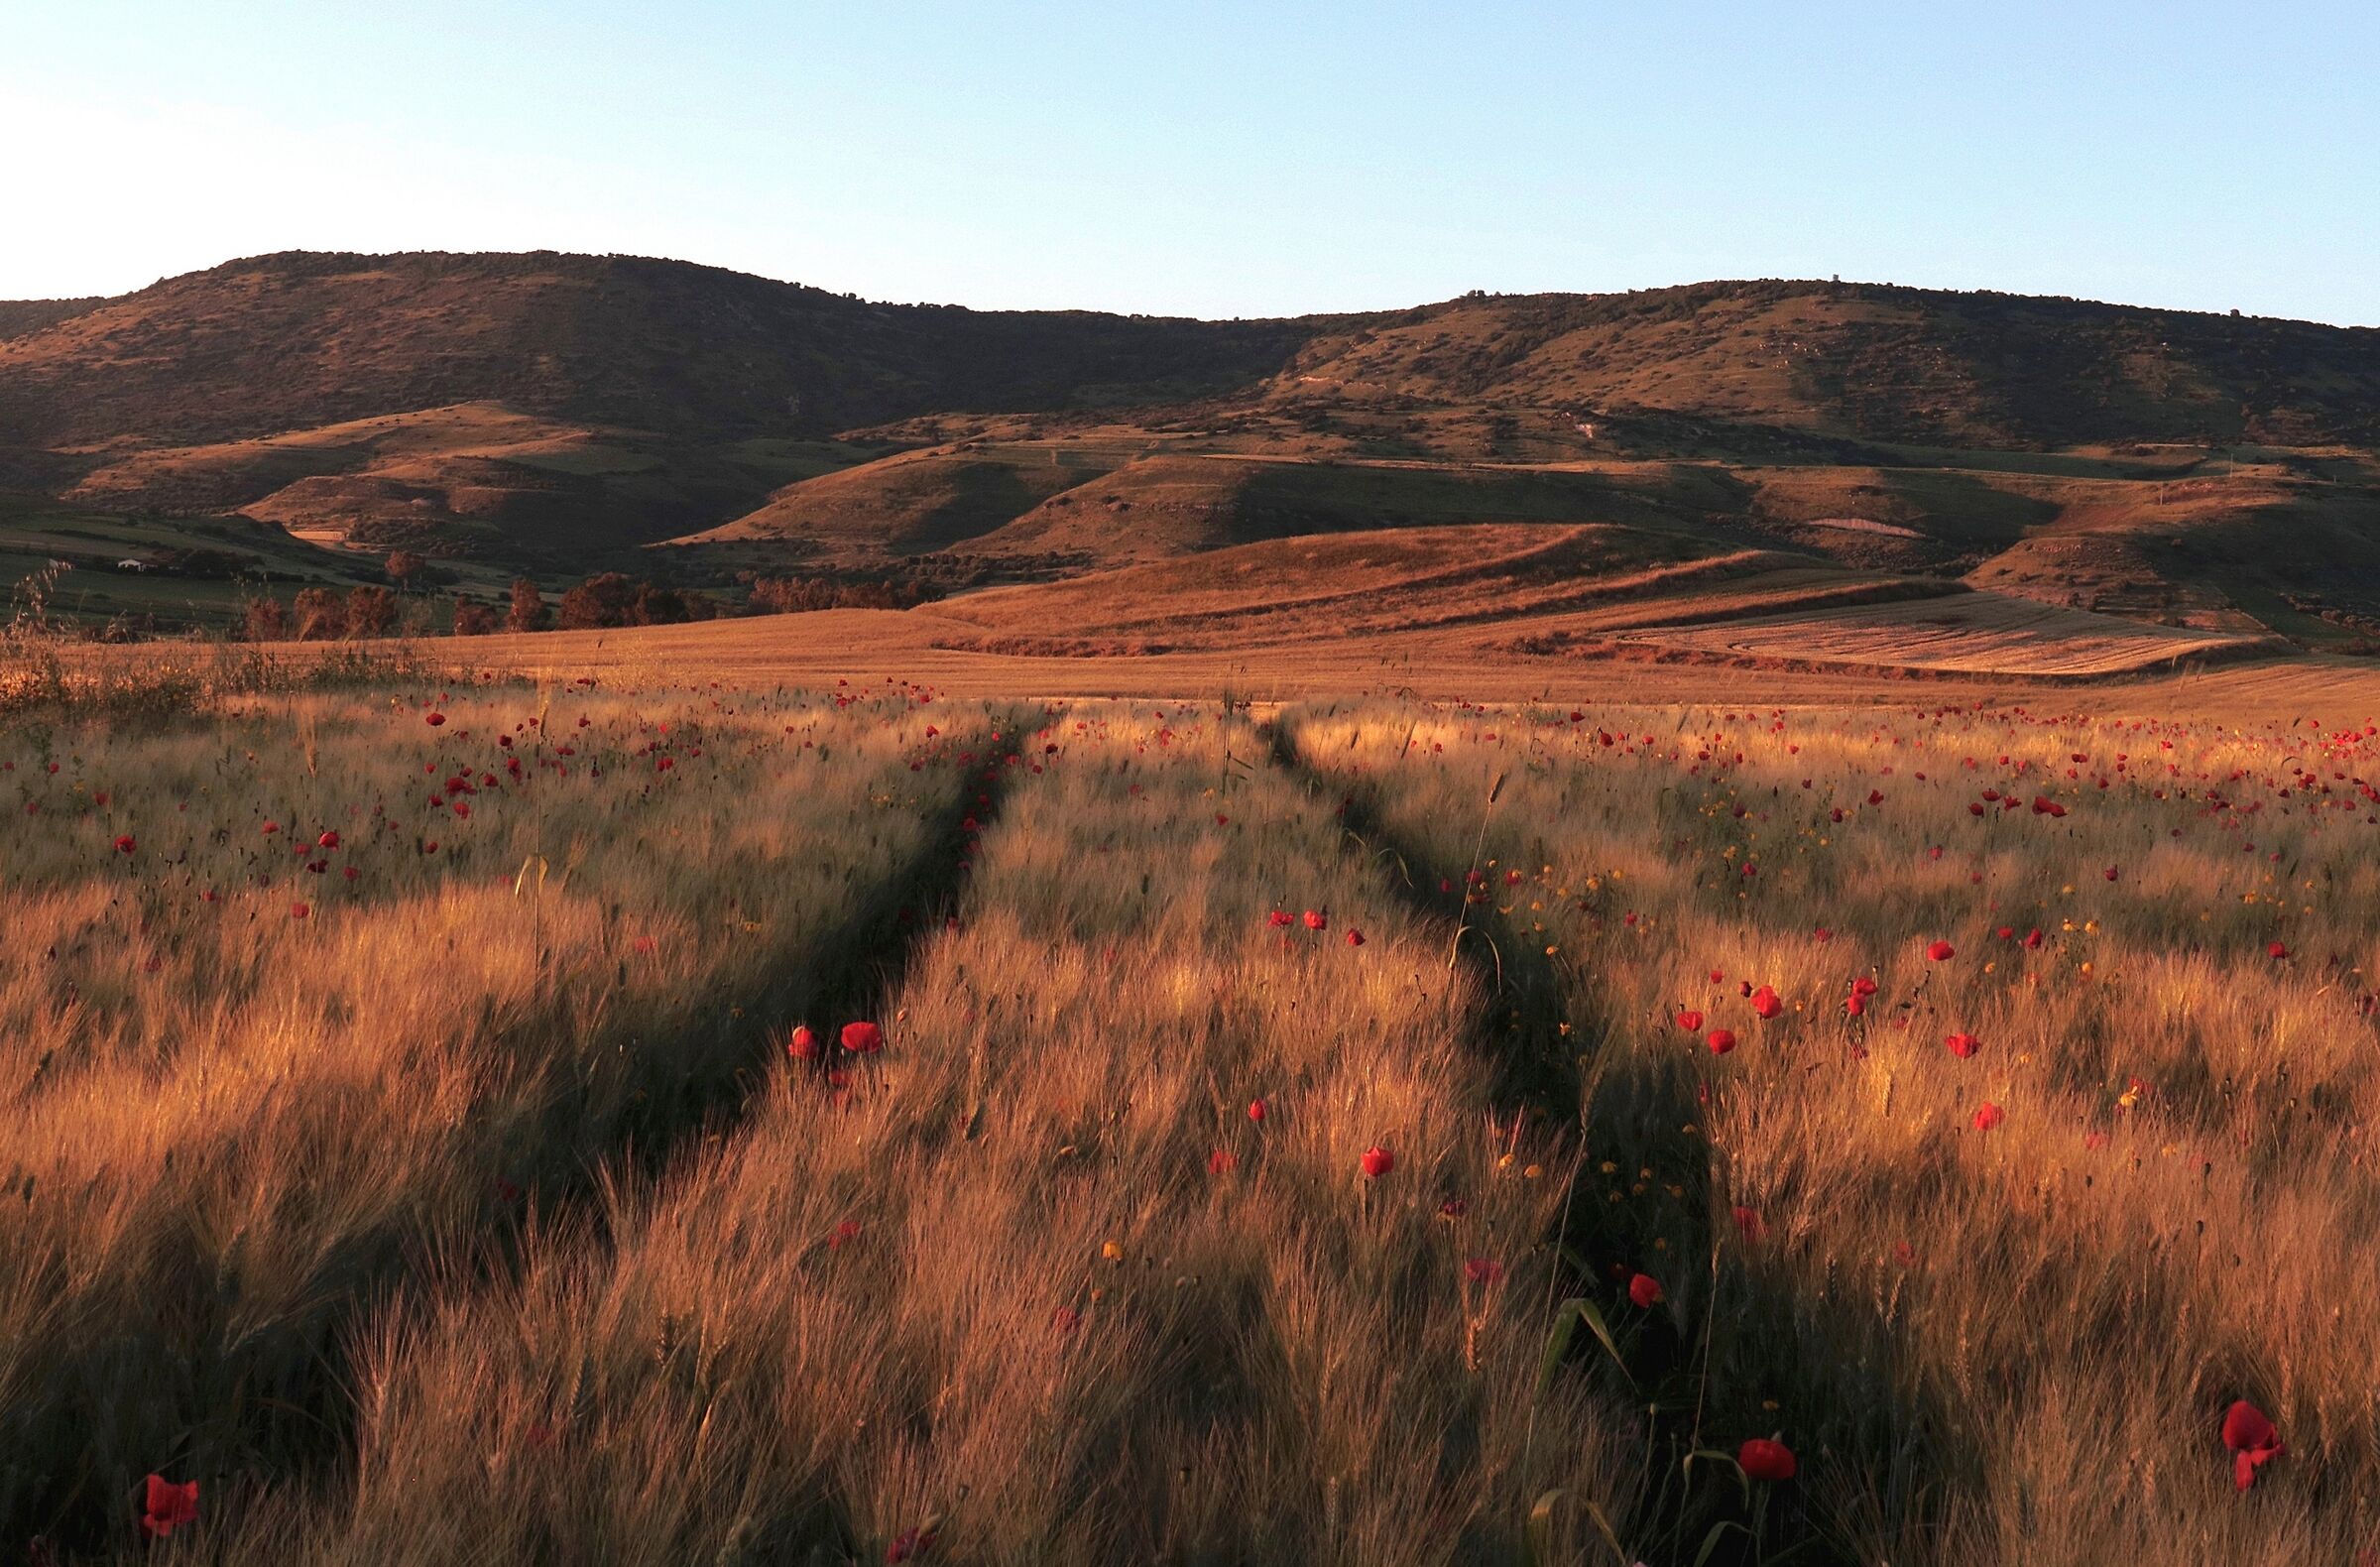 Poppies and wheat...